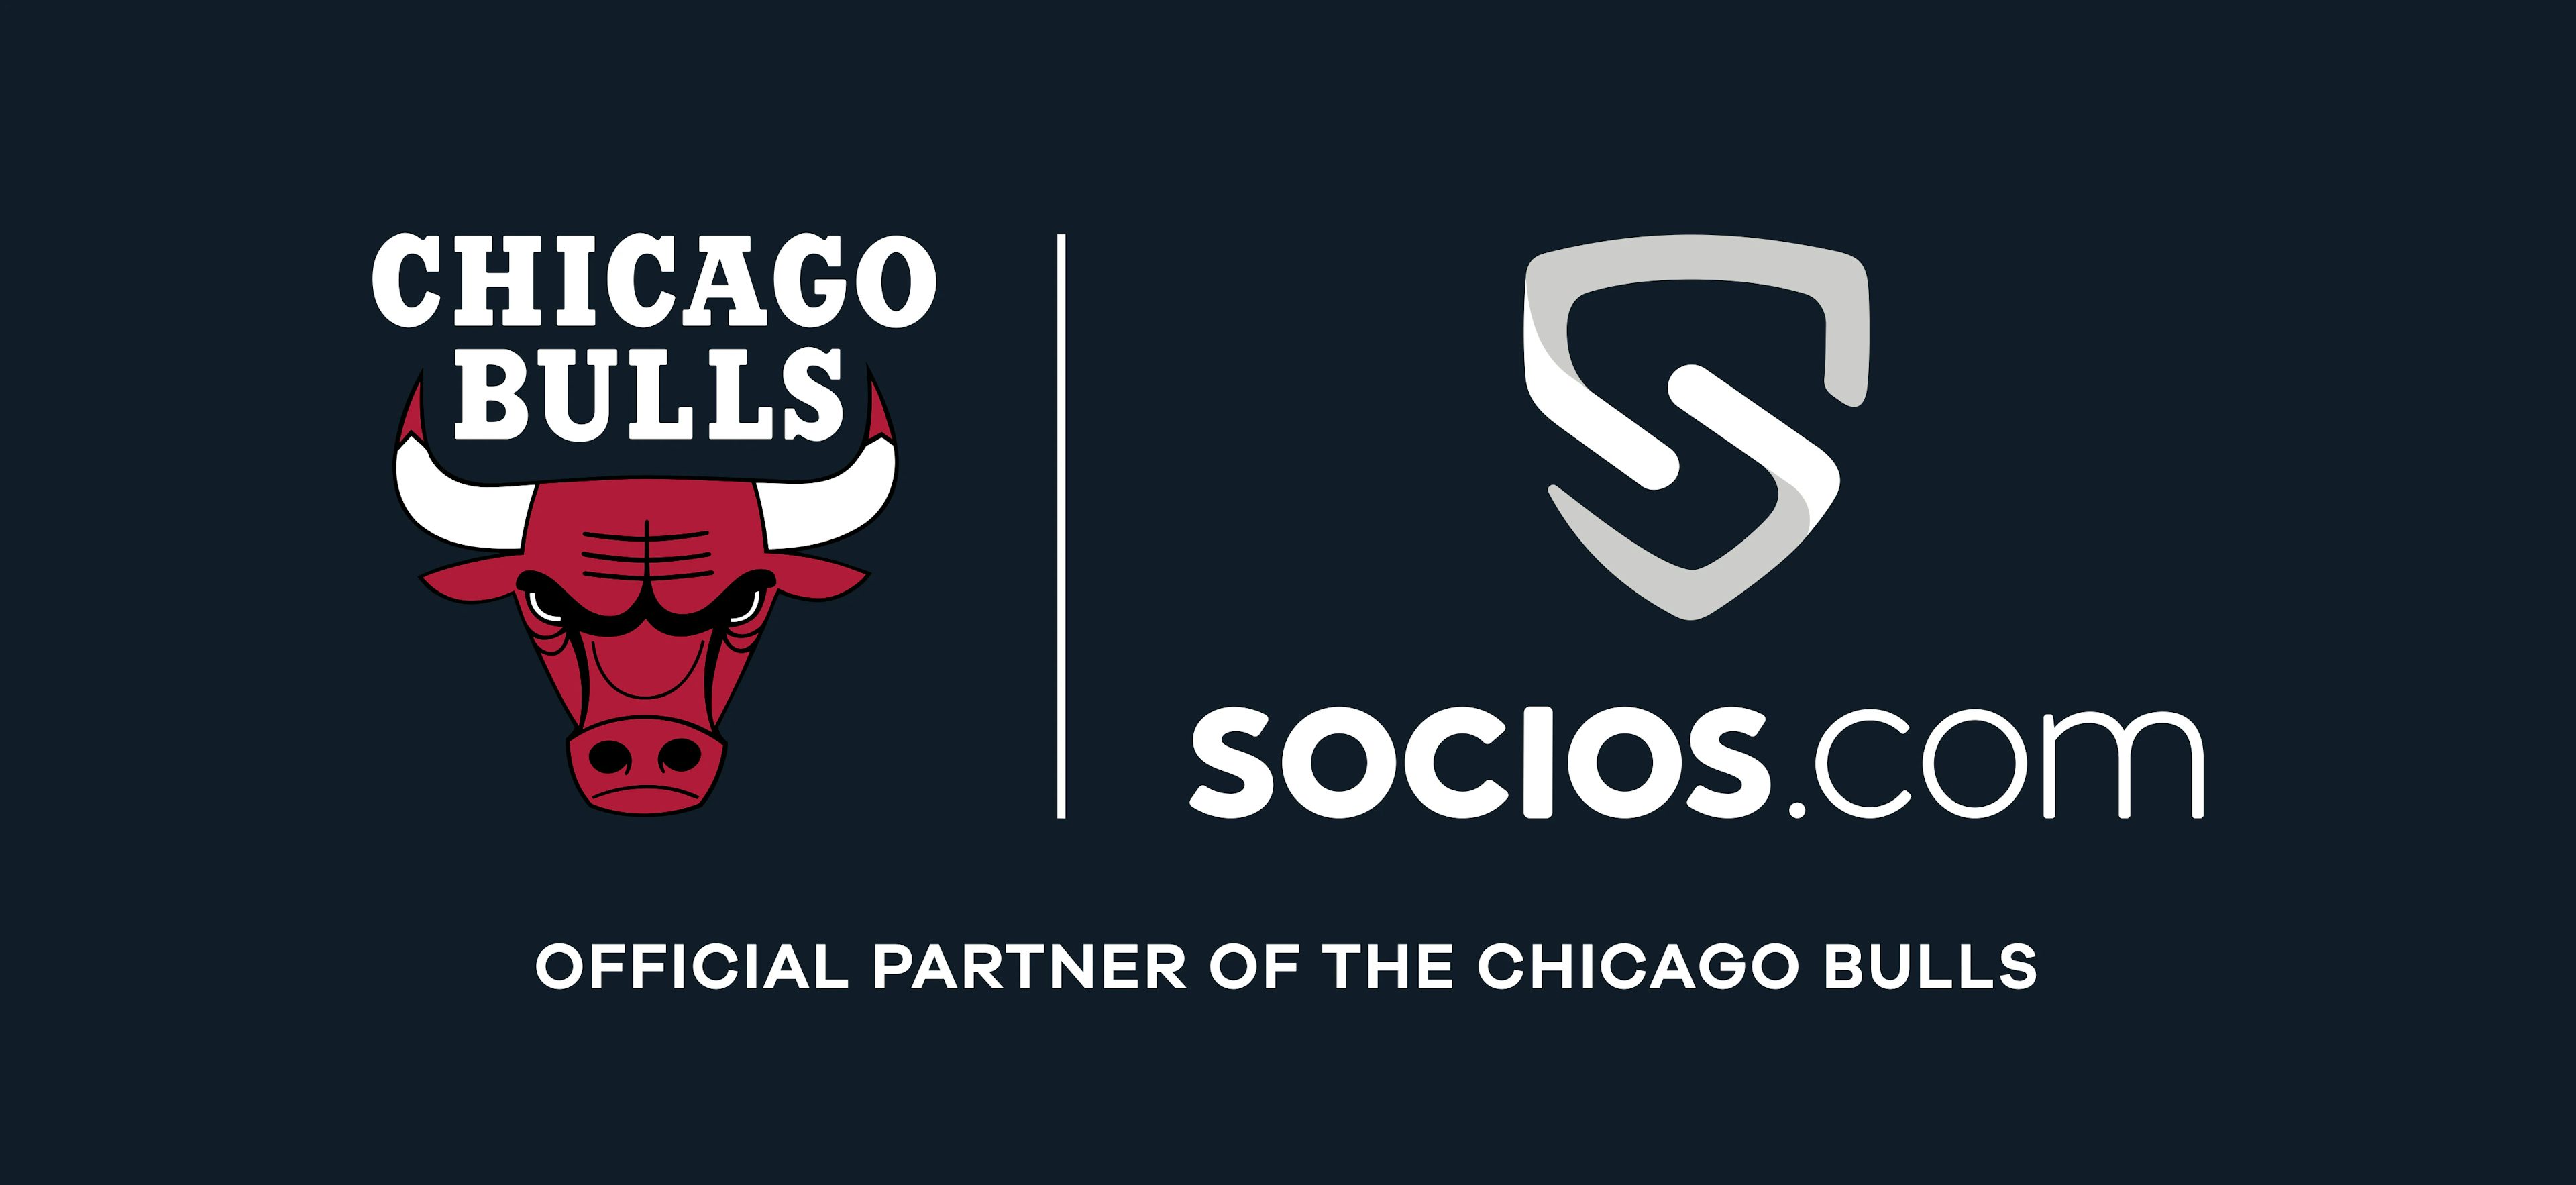 Socios Partnership with my hometown Chicago Bulls (who are actually good this year!!)